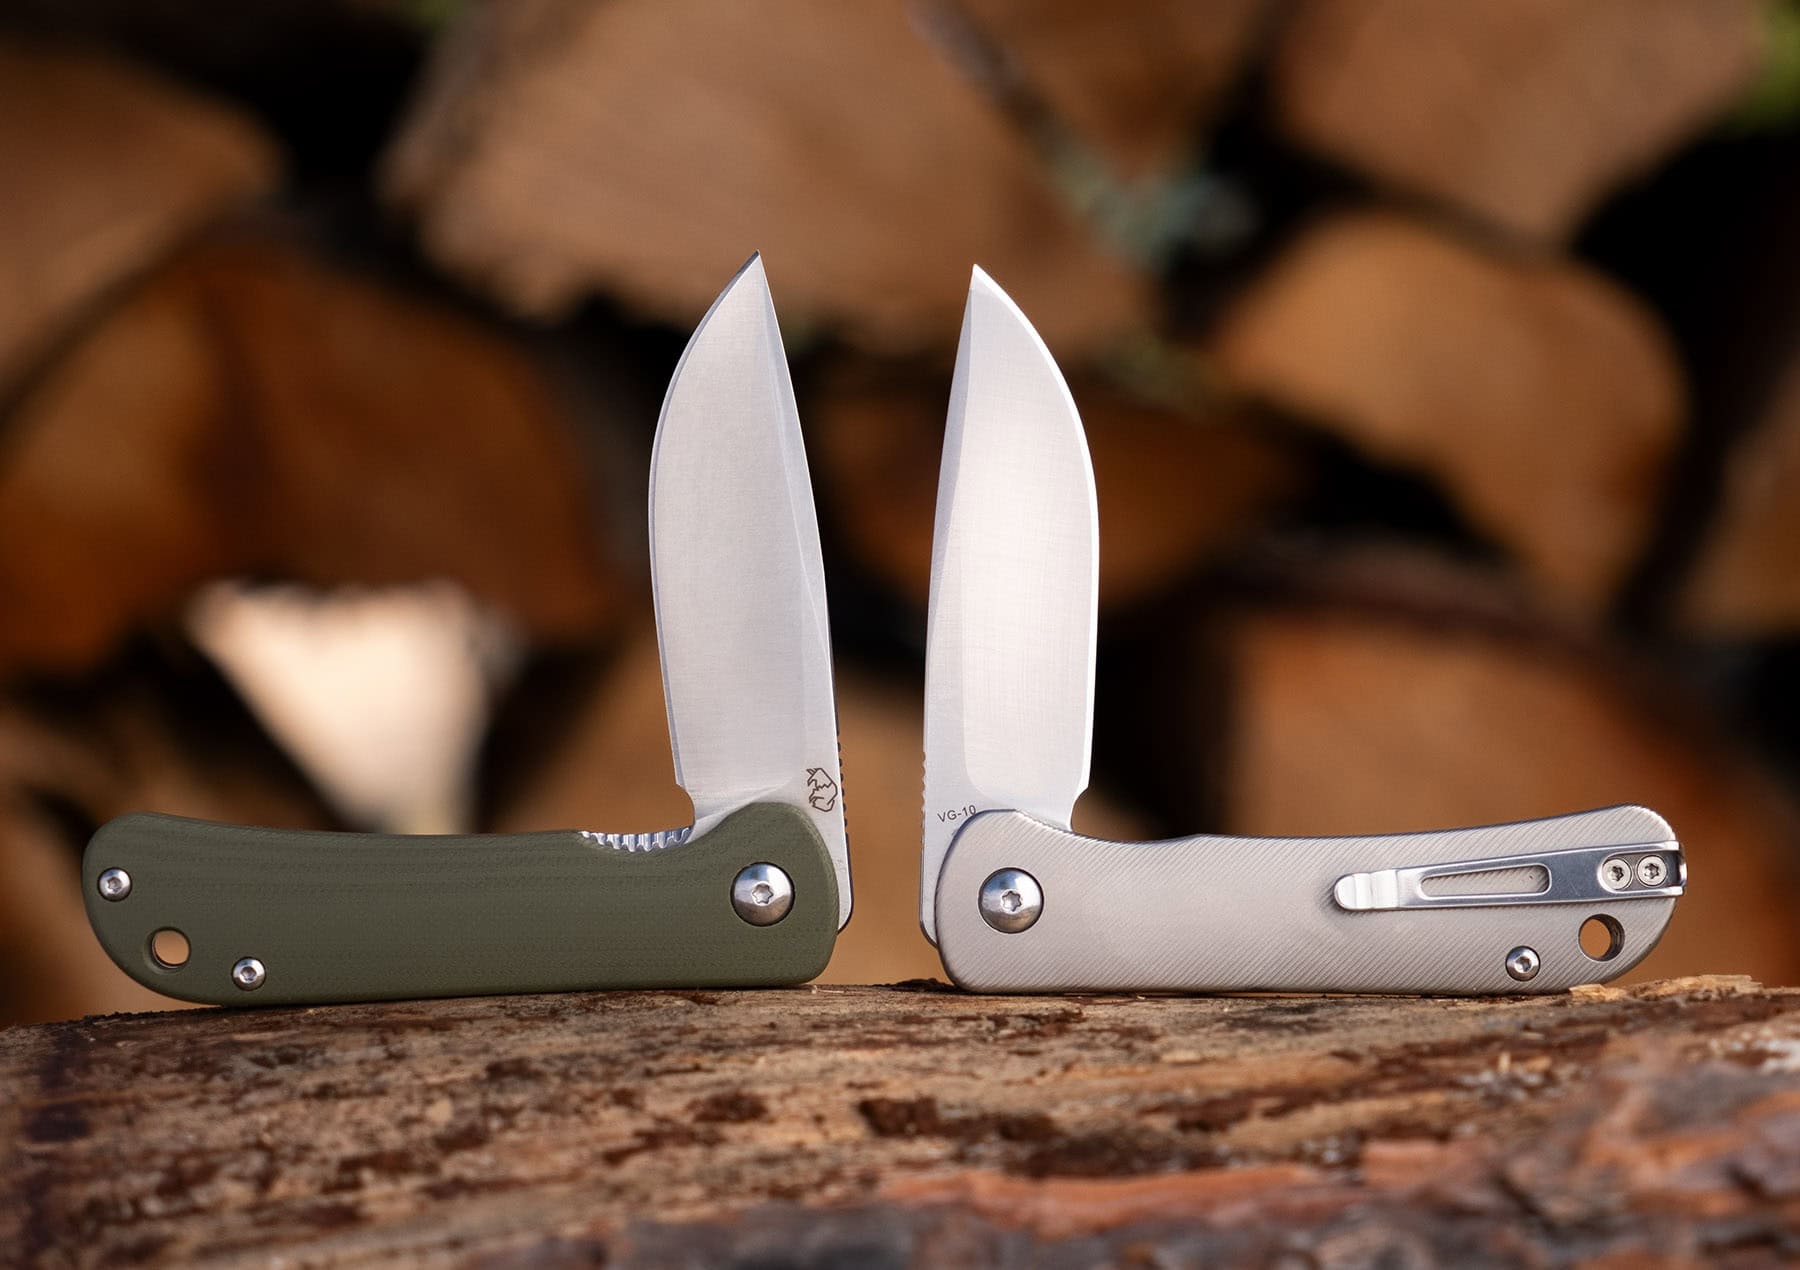 The Fast Eddie is available with G10 or titanium handle scales.